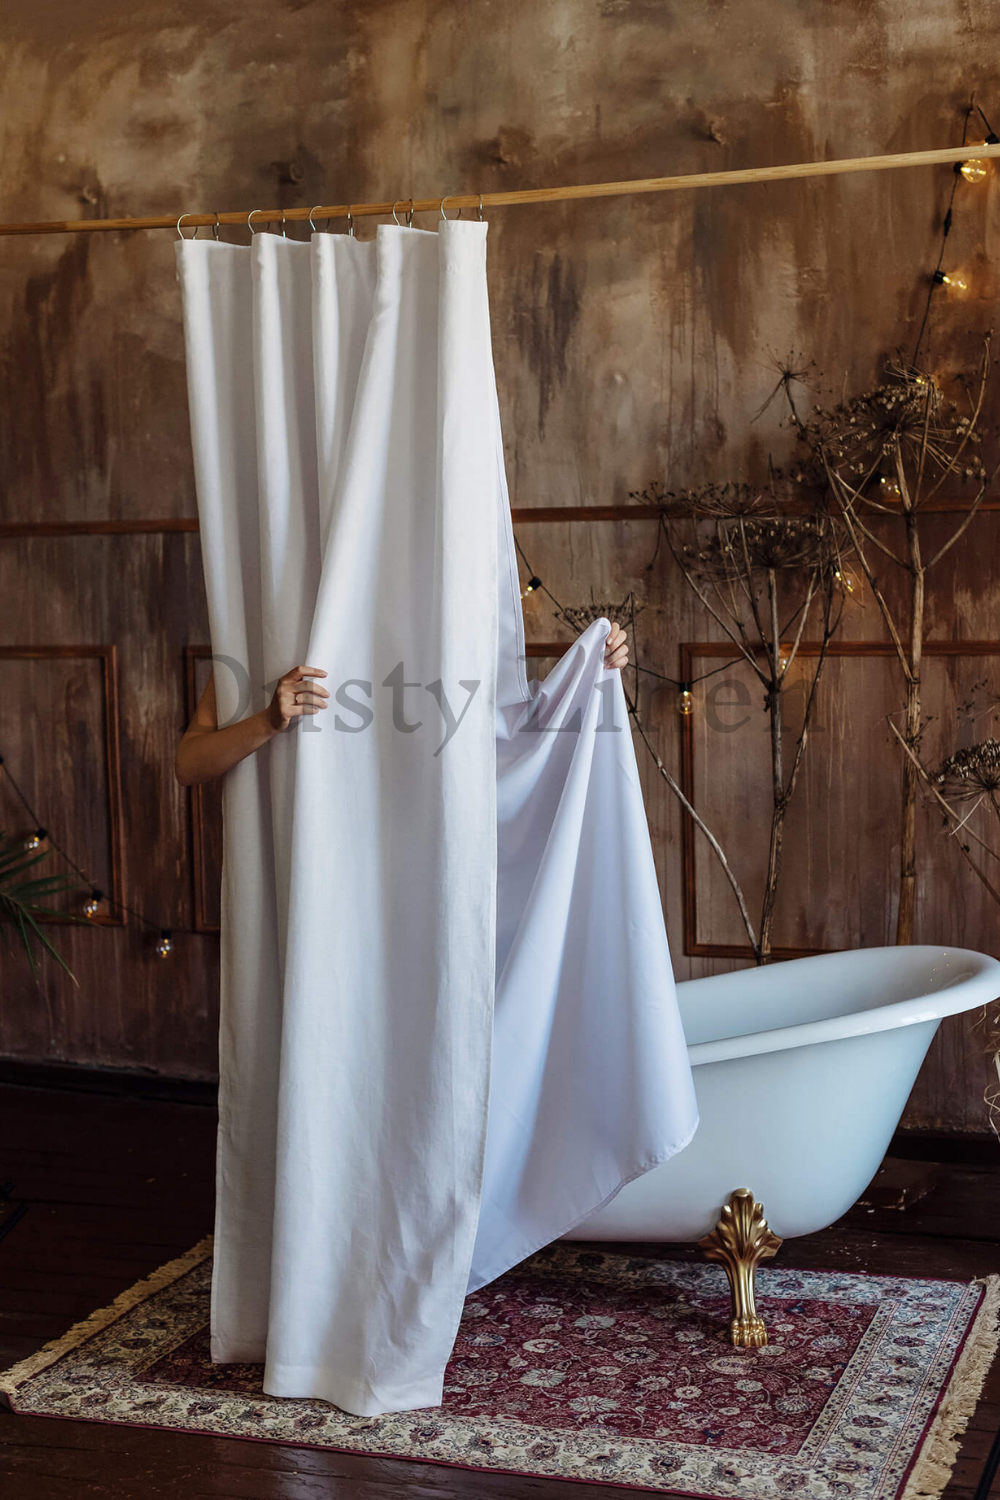 Rustic style a bathroom with a bathtub and a elegant shower curtain in white color.